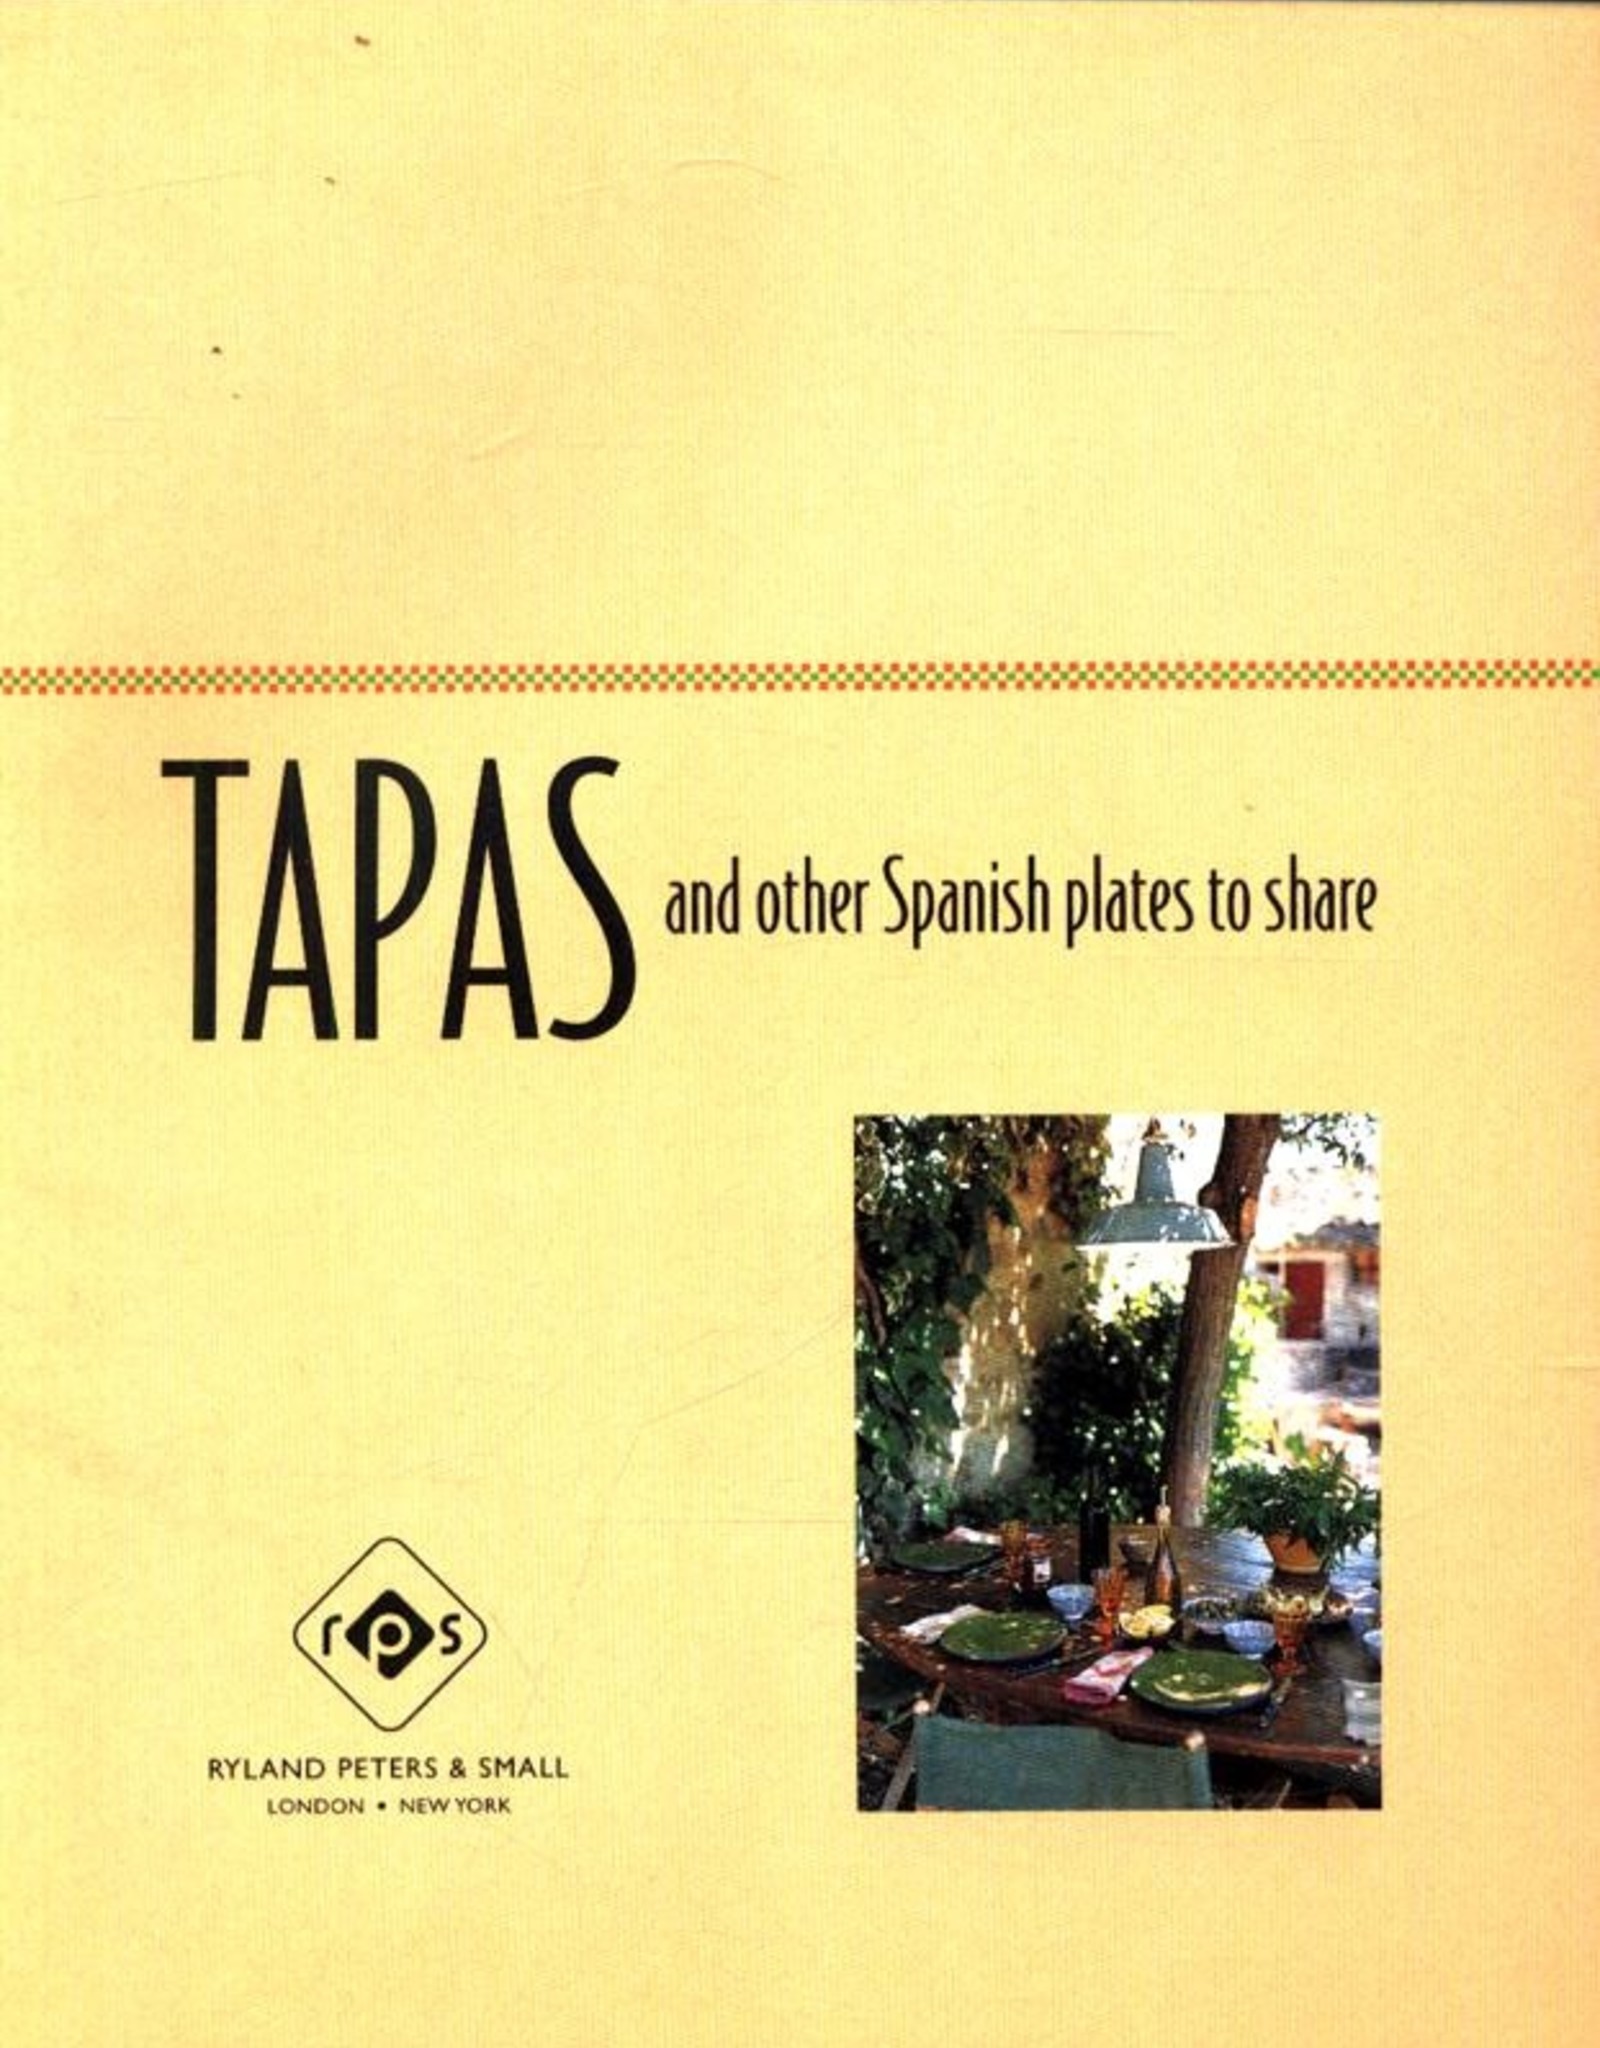 TAPAS AND OTHER SPANISH PLATES TO SHARE